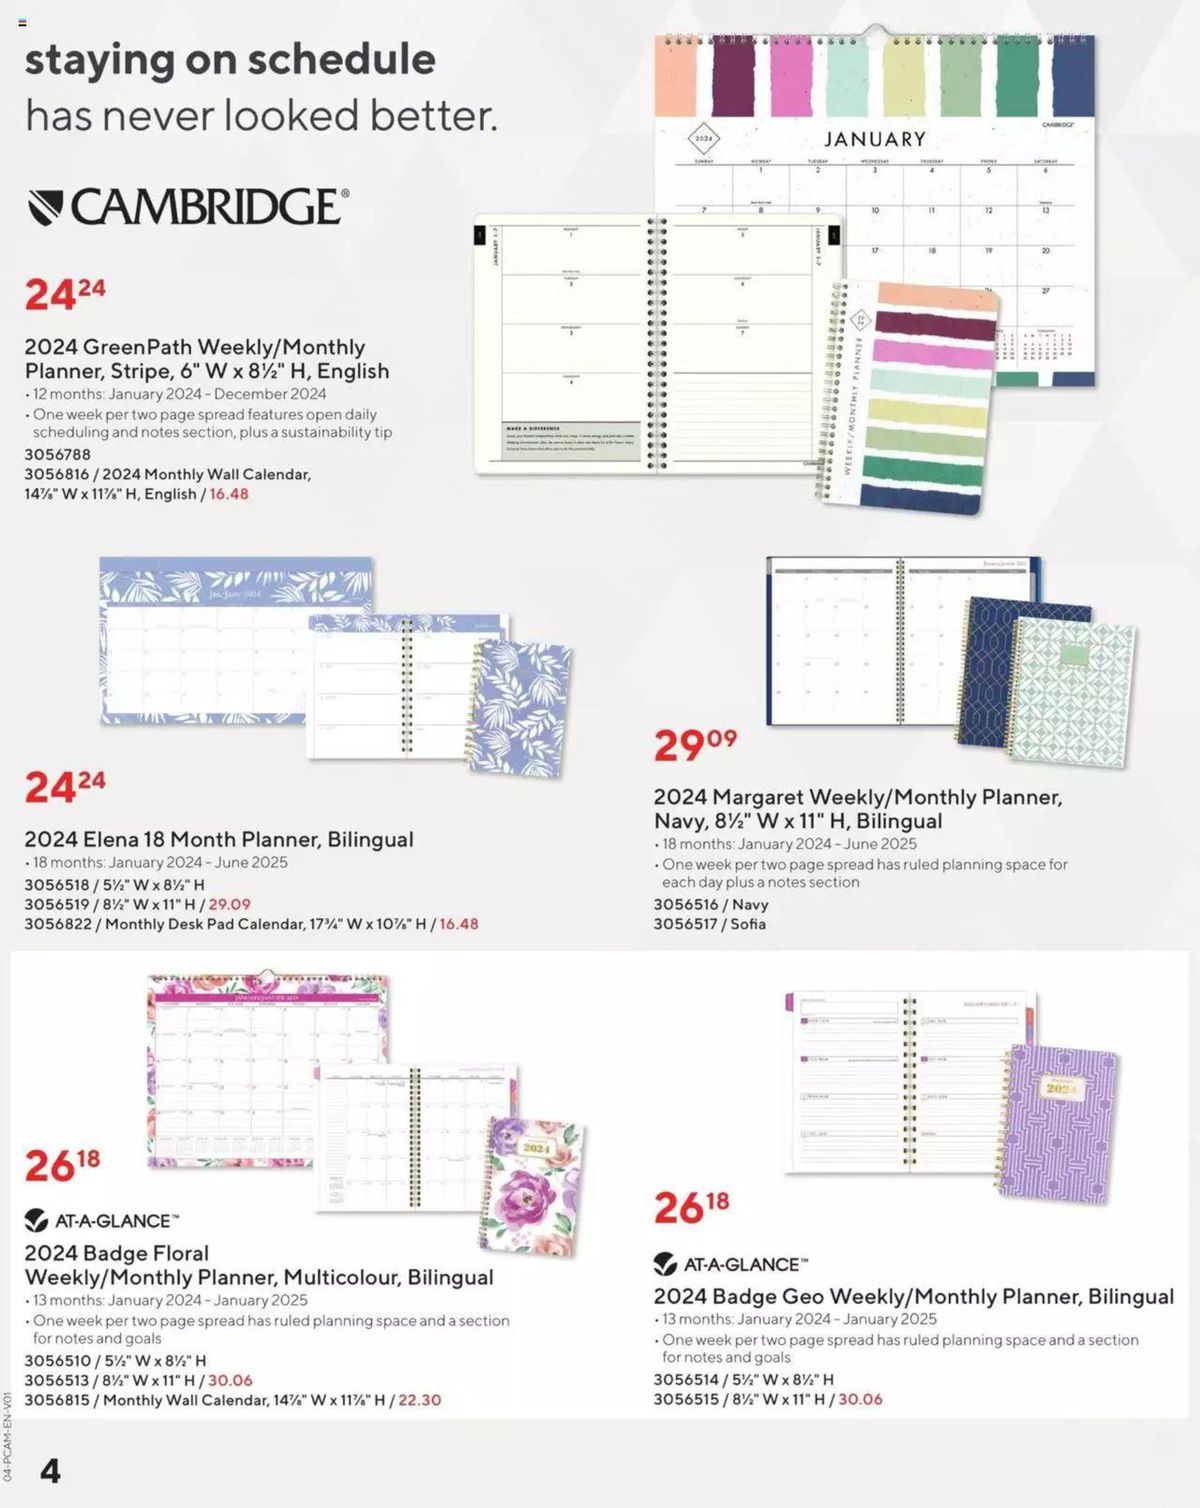 Staples Calendars + Planners Guide 2024 Flyer from Oct 13th to Dec